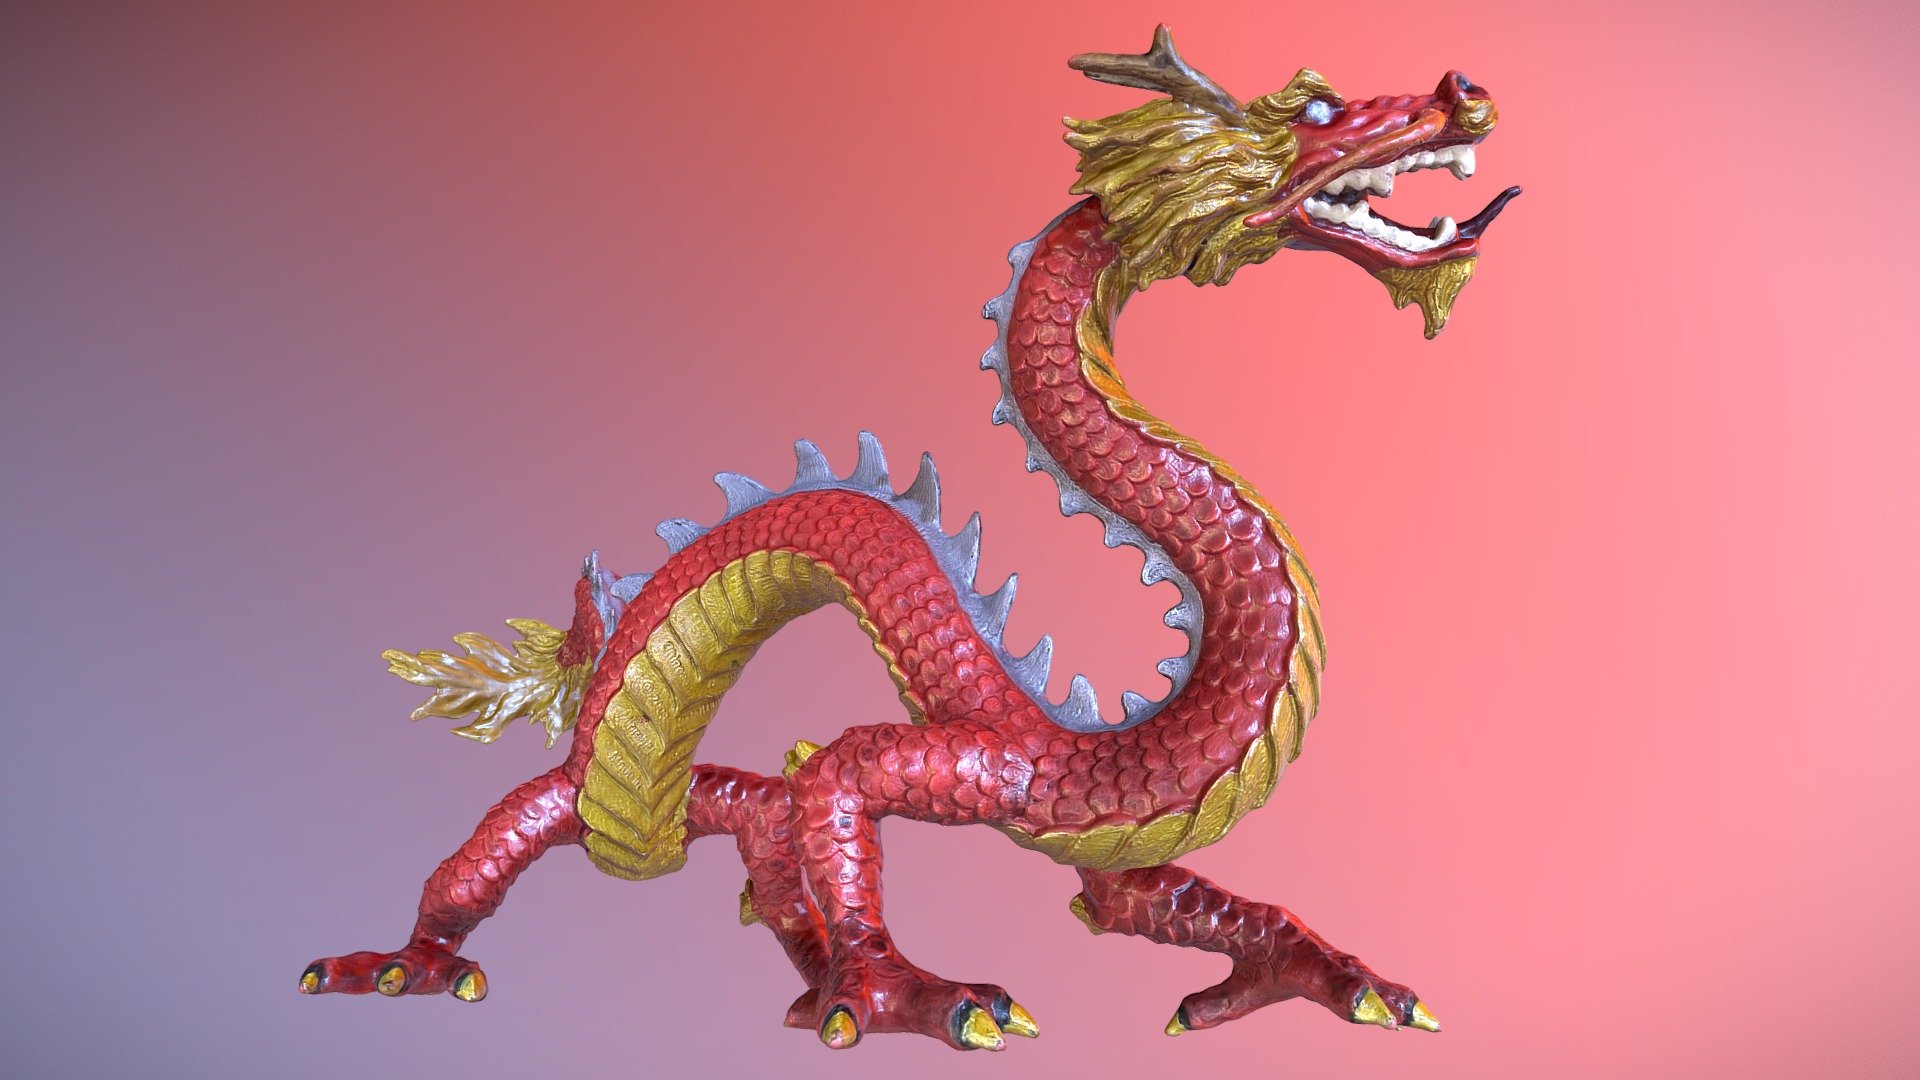 A Lunar New Year's Dragon

Water tight and ready to 3D print 3d model